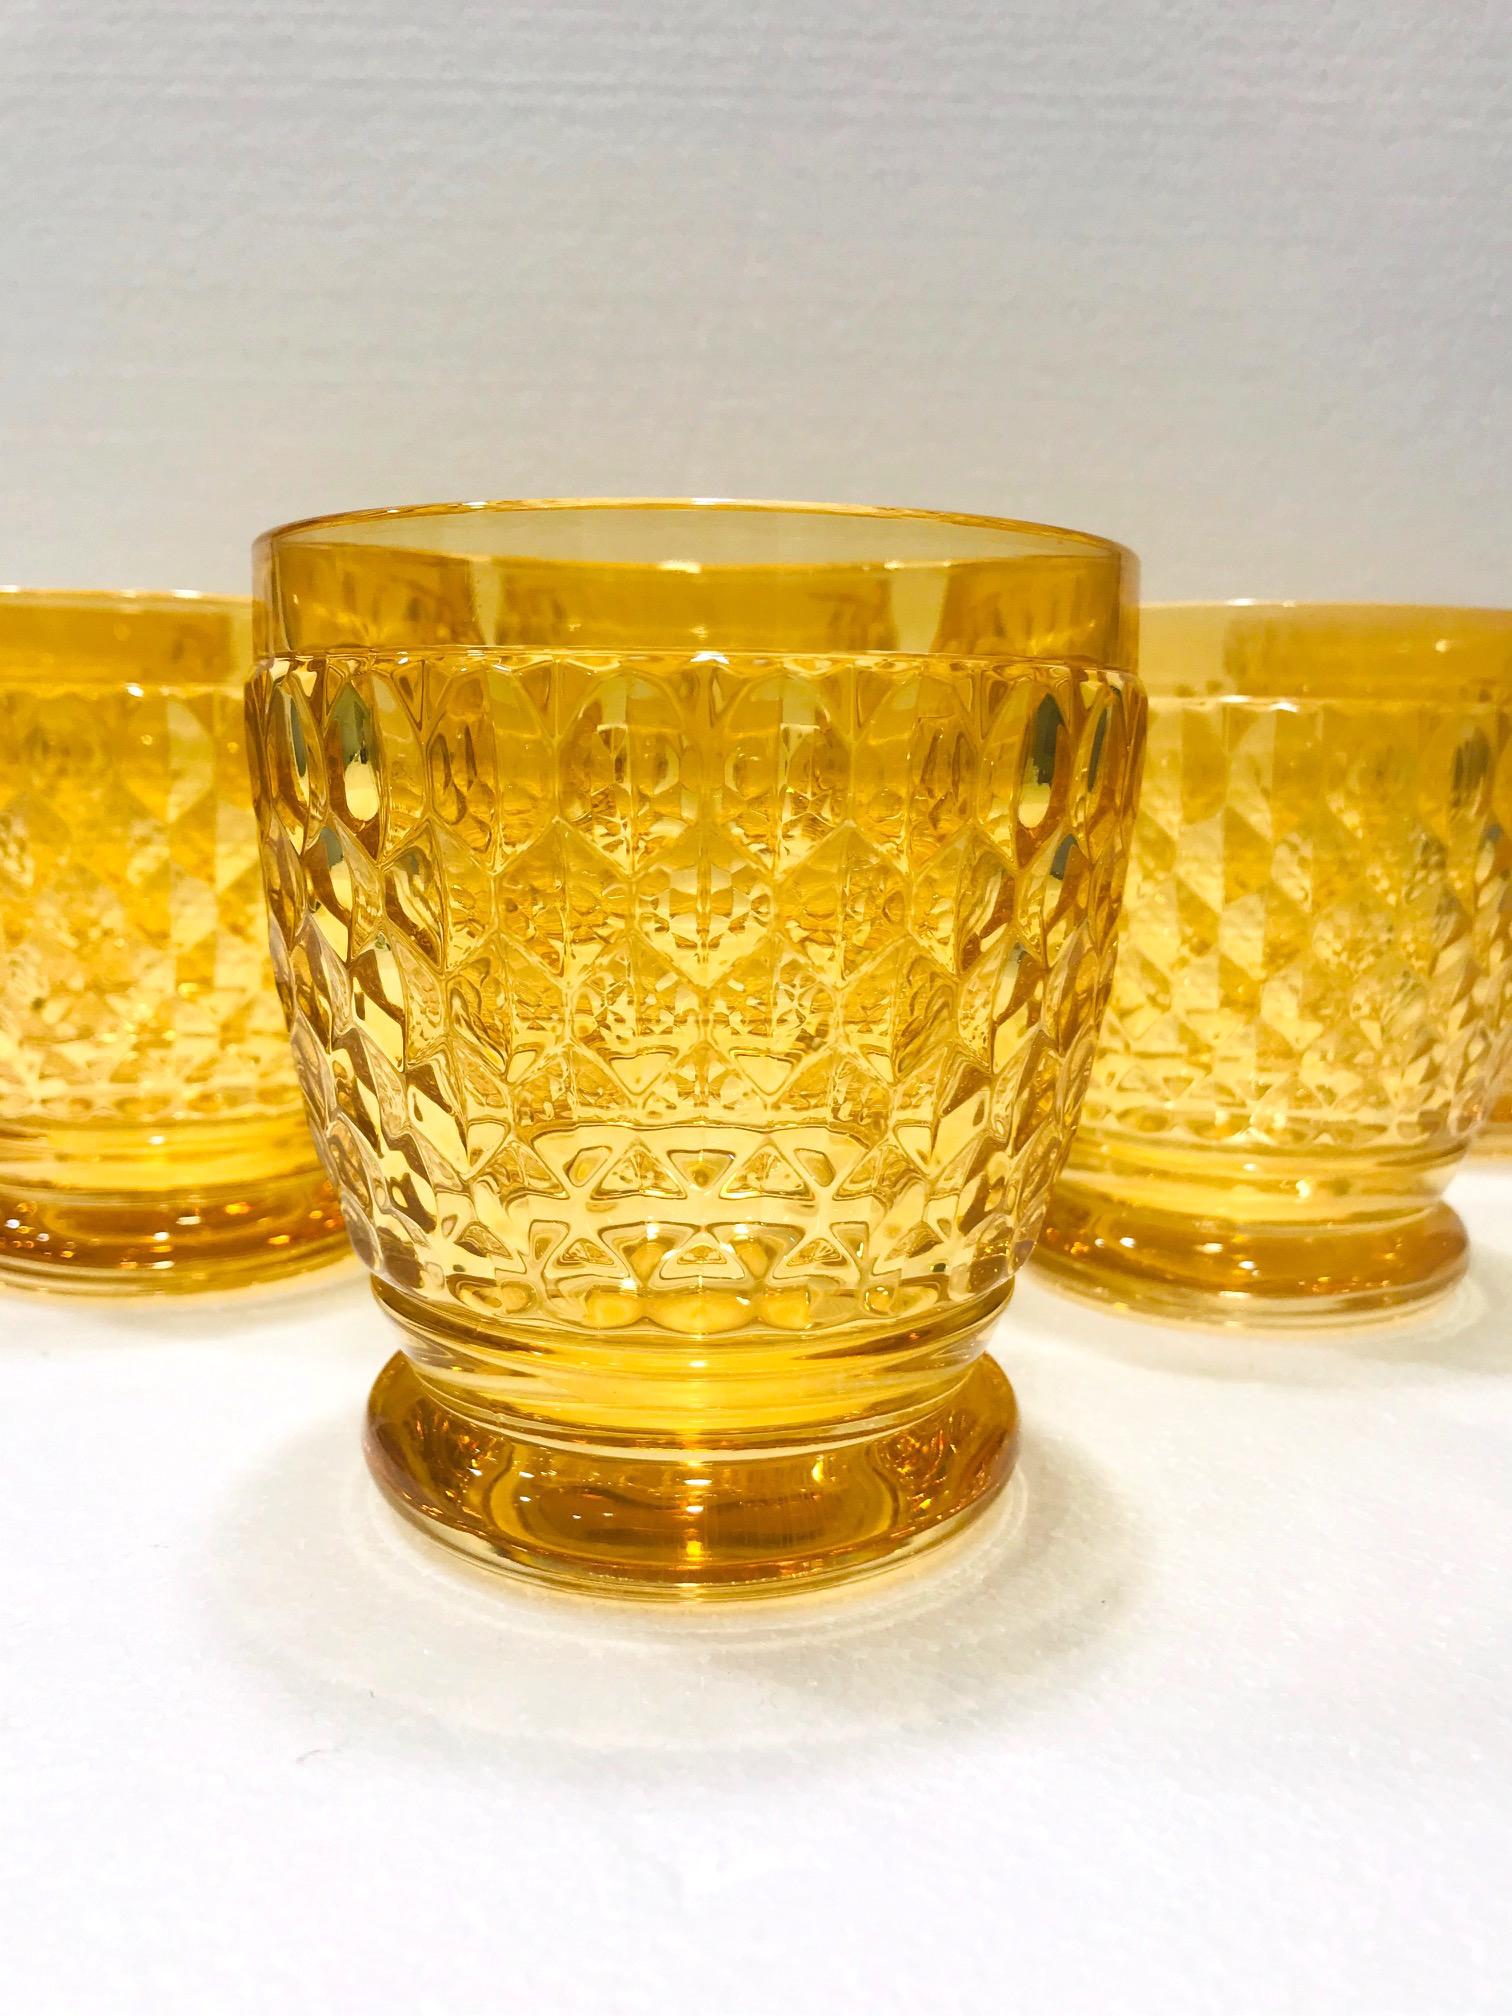 Hand-Crafted Six Villeroy & Boch Crystal Water Glasses in Amber Yellow, Germany, circa 2005